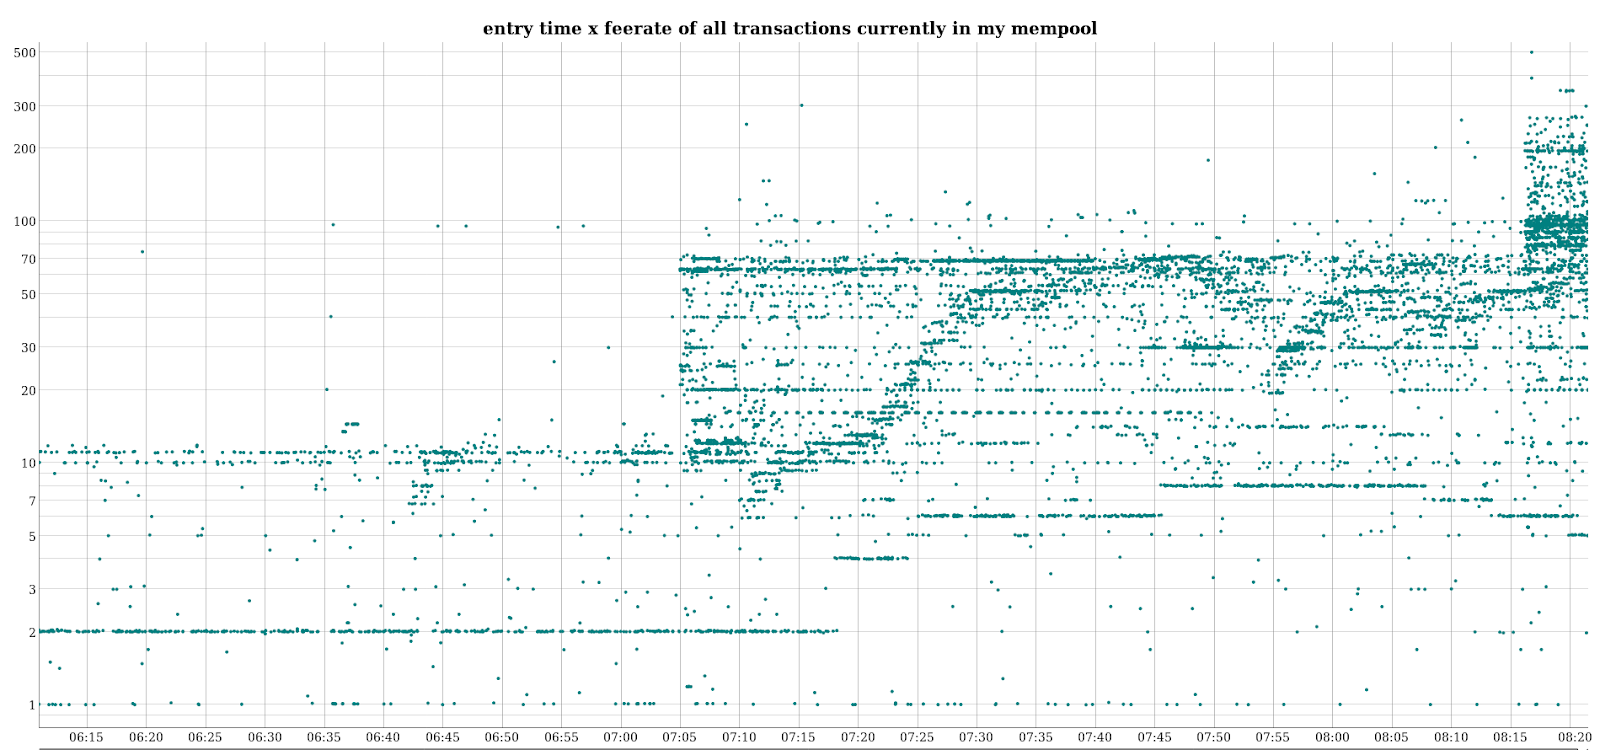 plotting the output of the getrawmempool RPC of Bitcoin Core